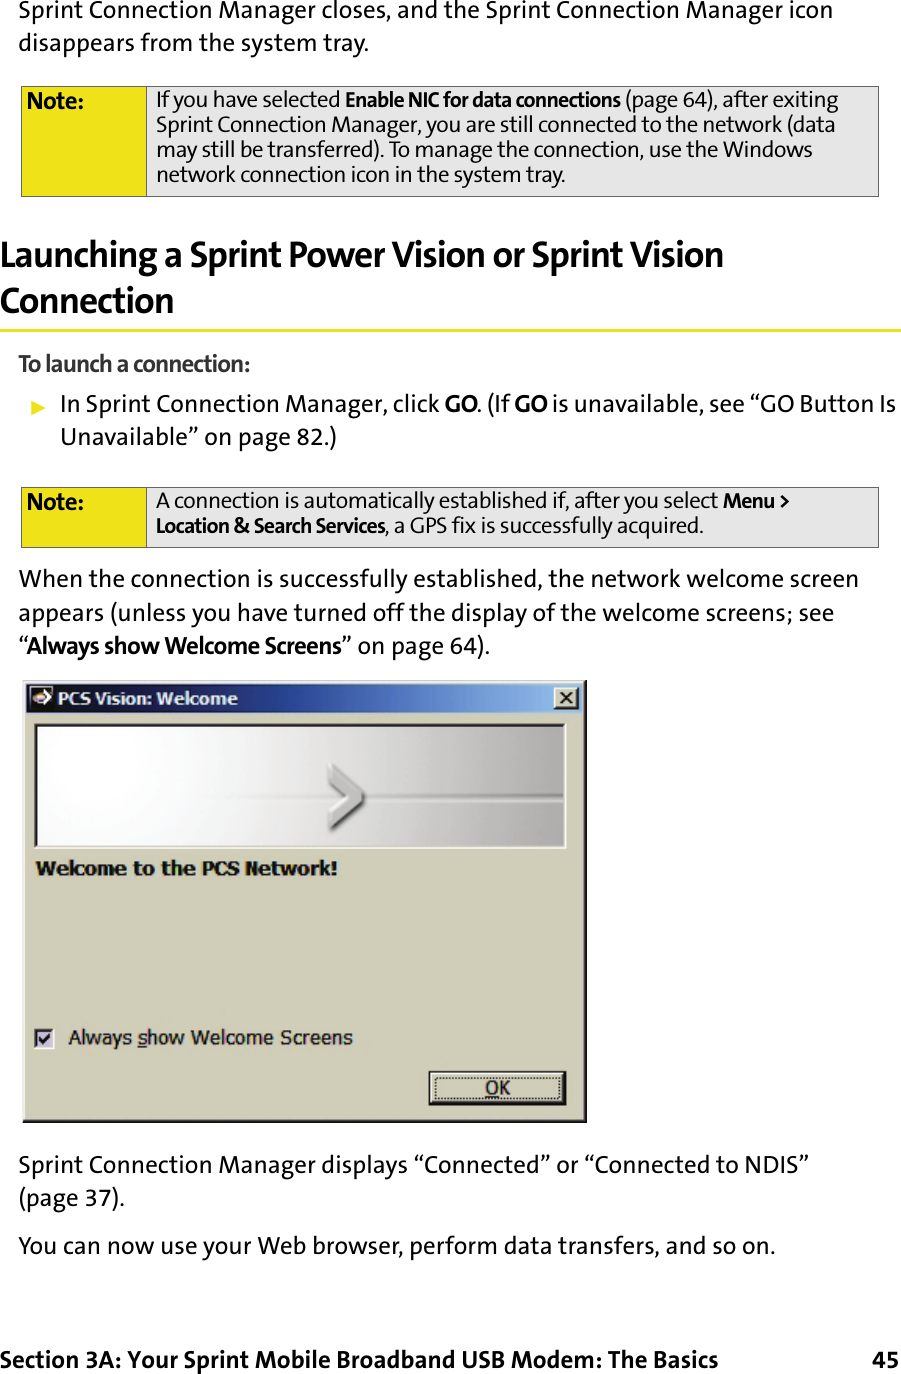 Section 3A: Your Sprint Mobile Broadband USB Modem: The Basics      45Sprint Connection Manager closes, and the Sprint Connection Manager icon disappears from the system tray.Launching a Sprint Power Vision or Sprint Vision ConnectionTo launch a connection:䊳In Sprint Connection Manager, click GO. (If GO is unavailable, see “GO Button Is Unavailable” on page 82.)When the connection is successfully established, the network welcome screen appears (unless you have turned off the display of the welcome screens; see “Always show Welcome Screens” on page 64).Sprint Connection Manager displays “Connected” or “Connected to NDIS” (page 37).You can now use your Web browser, perform data transfers, and so on.Note: If you have selected Enable NIC for data connections (page 64), after exiting Sprint Connection Manager, you are still connected to the network (data may still be transferred). To manage the connection, use the Windows network connection icon in the system tray.Note: A connection is automatically established if, after you select Menu &gt; Location &amp; Search Services, a GPS fix is successfully acquired.